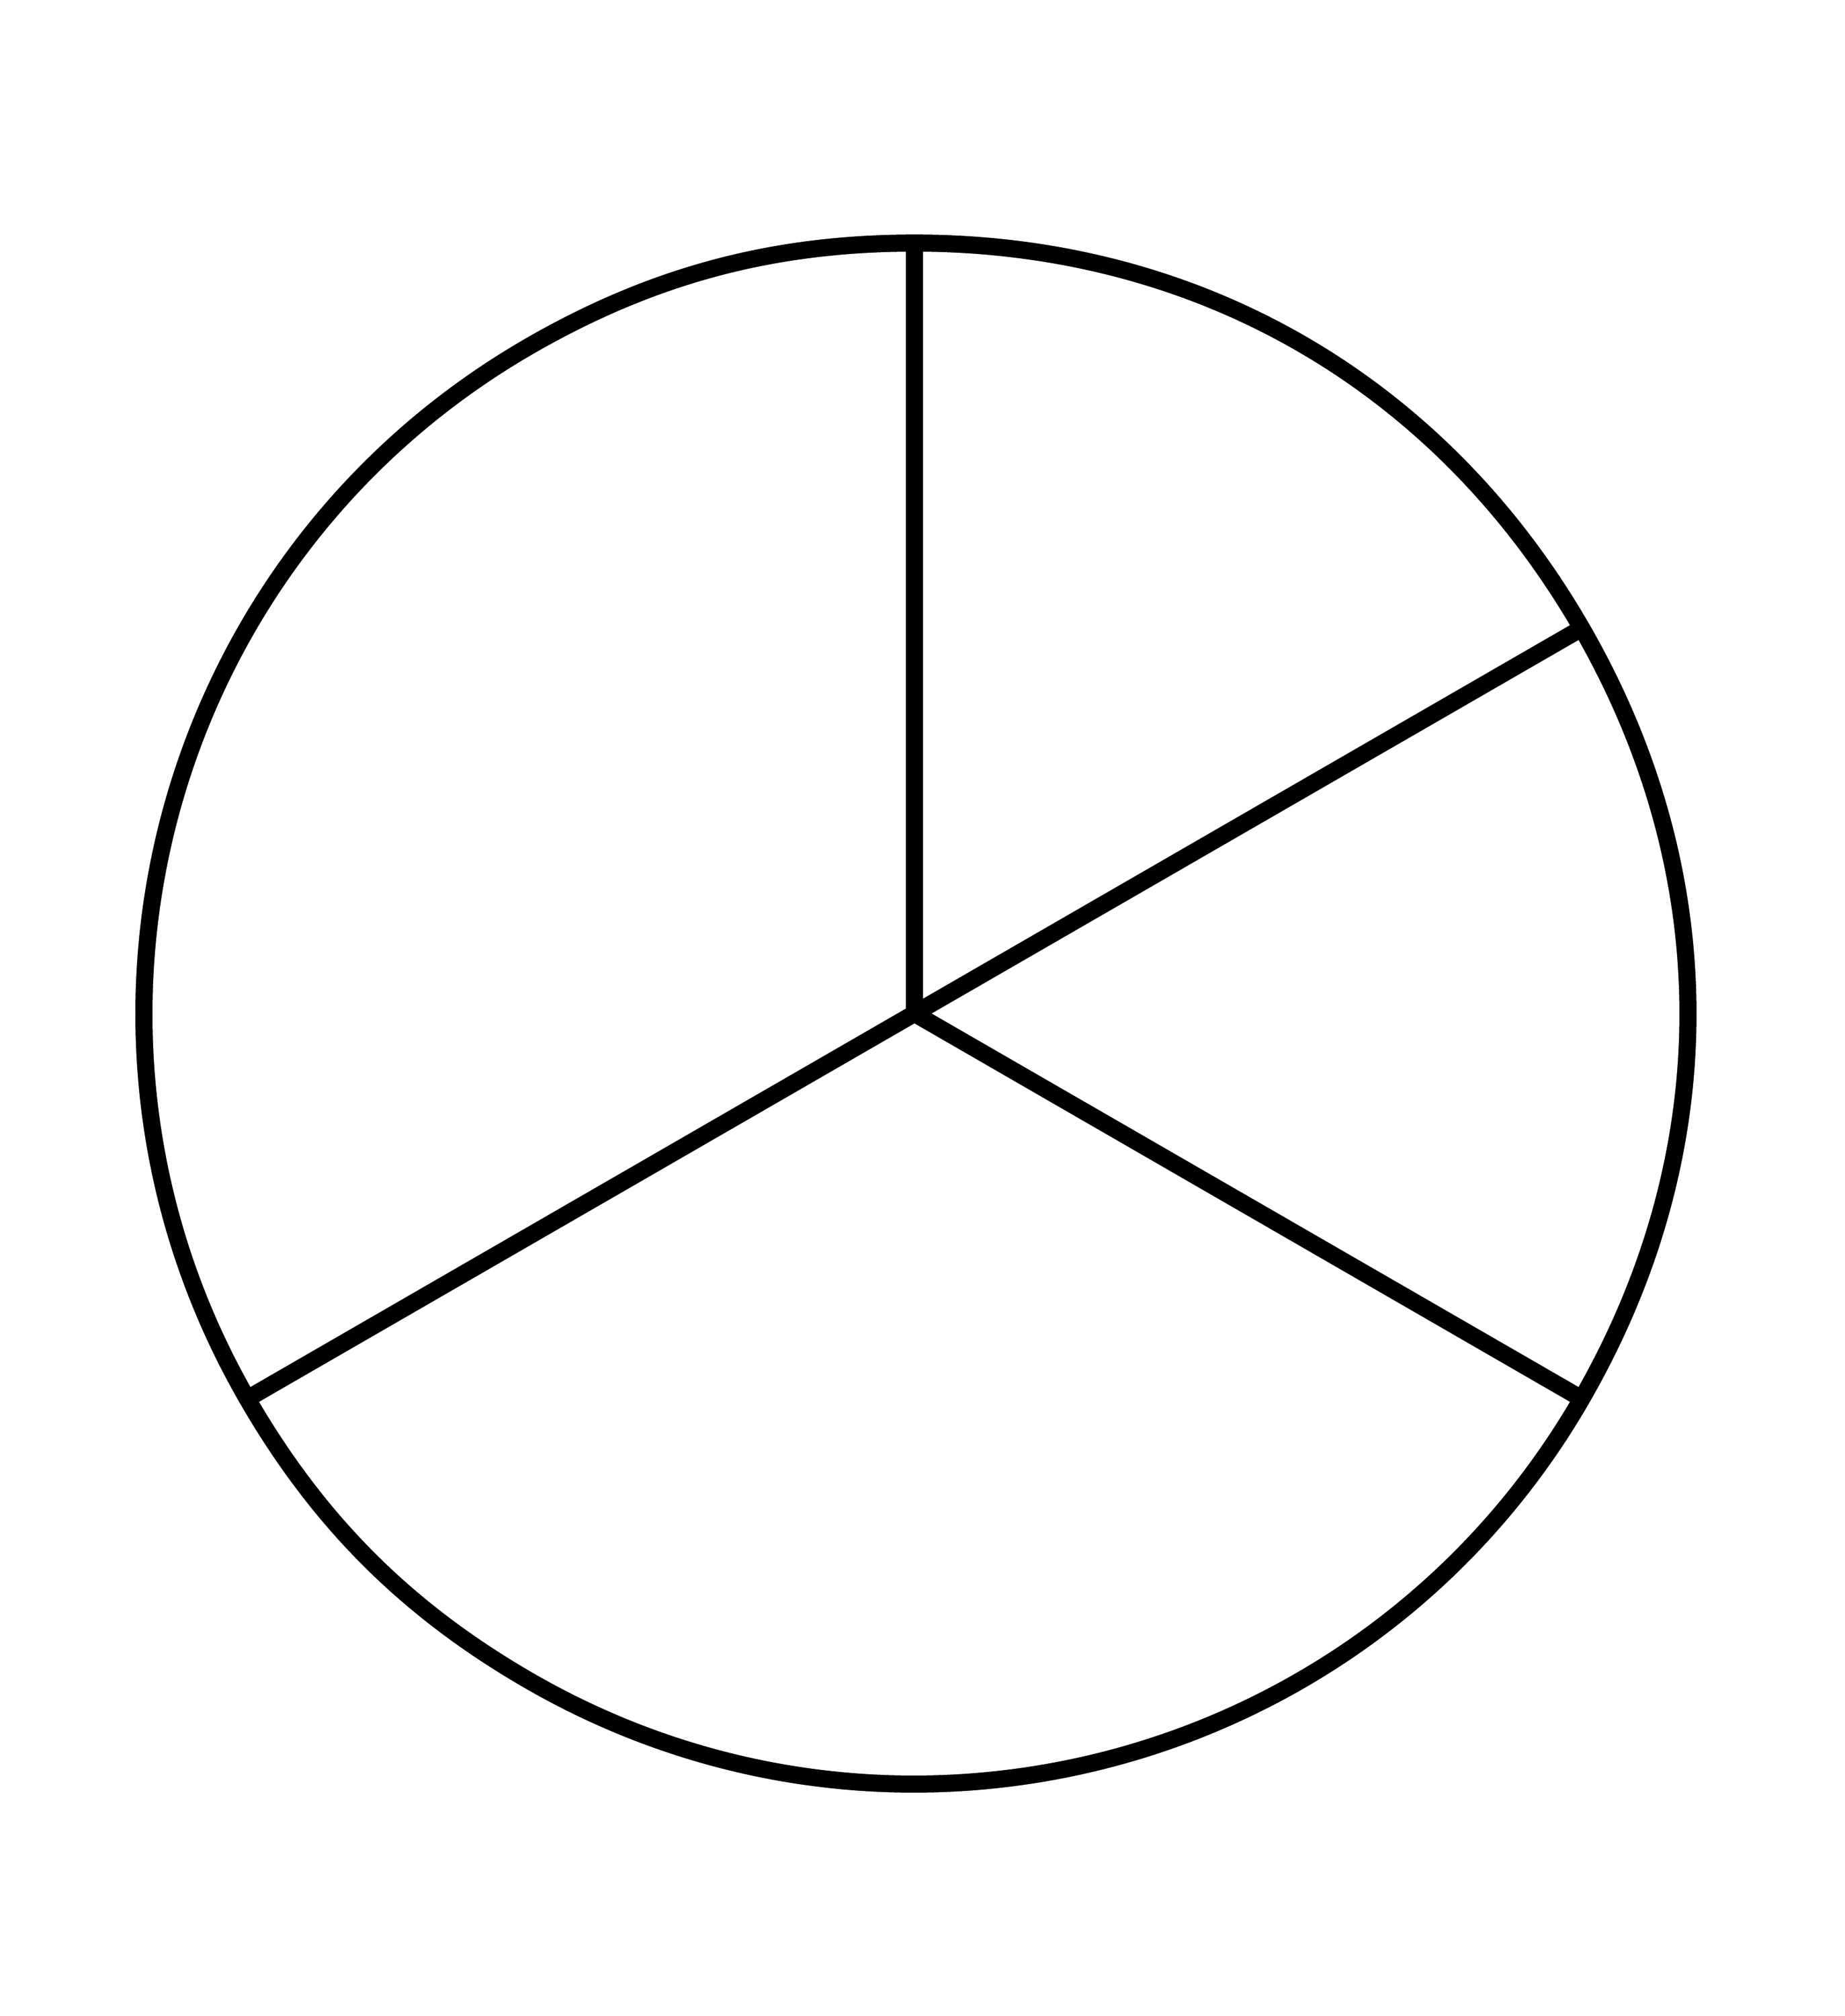 Two Thirds and Two Sixths of a Pie Fraction | ClipArt ETC